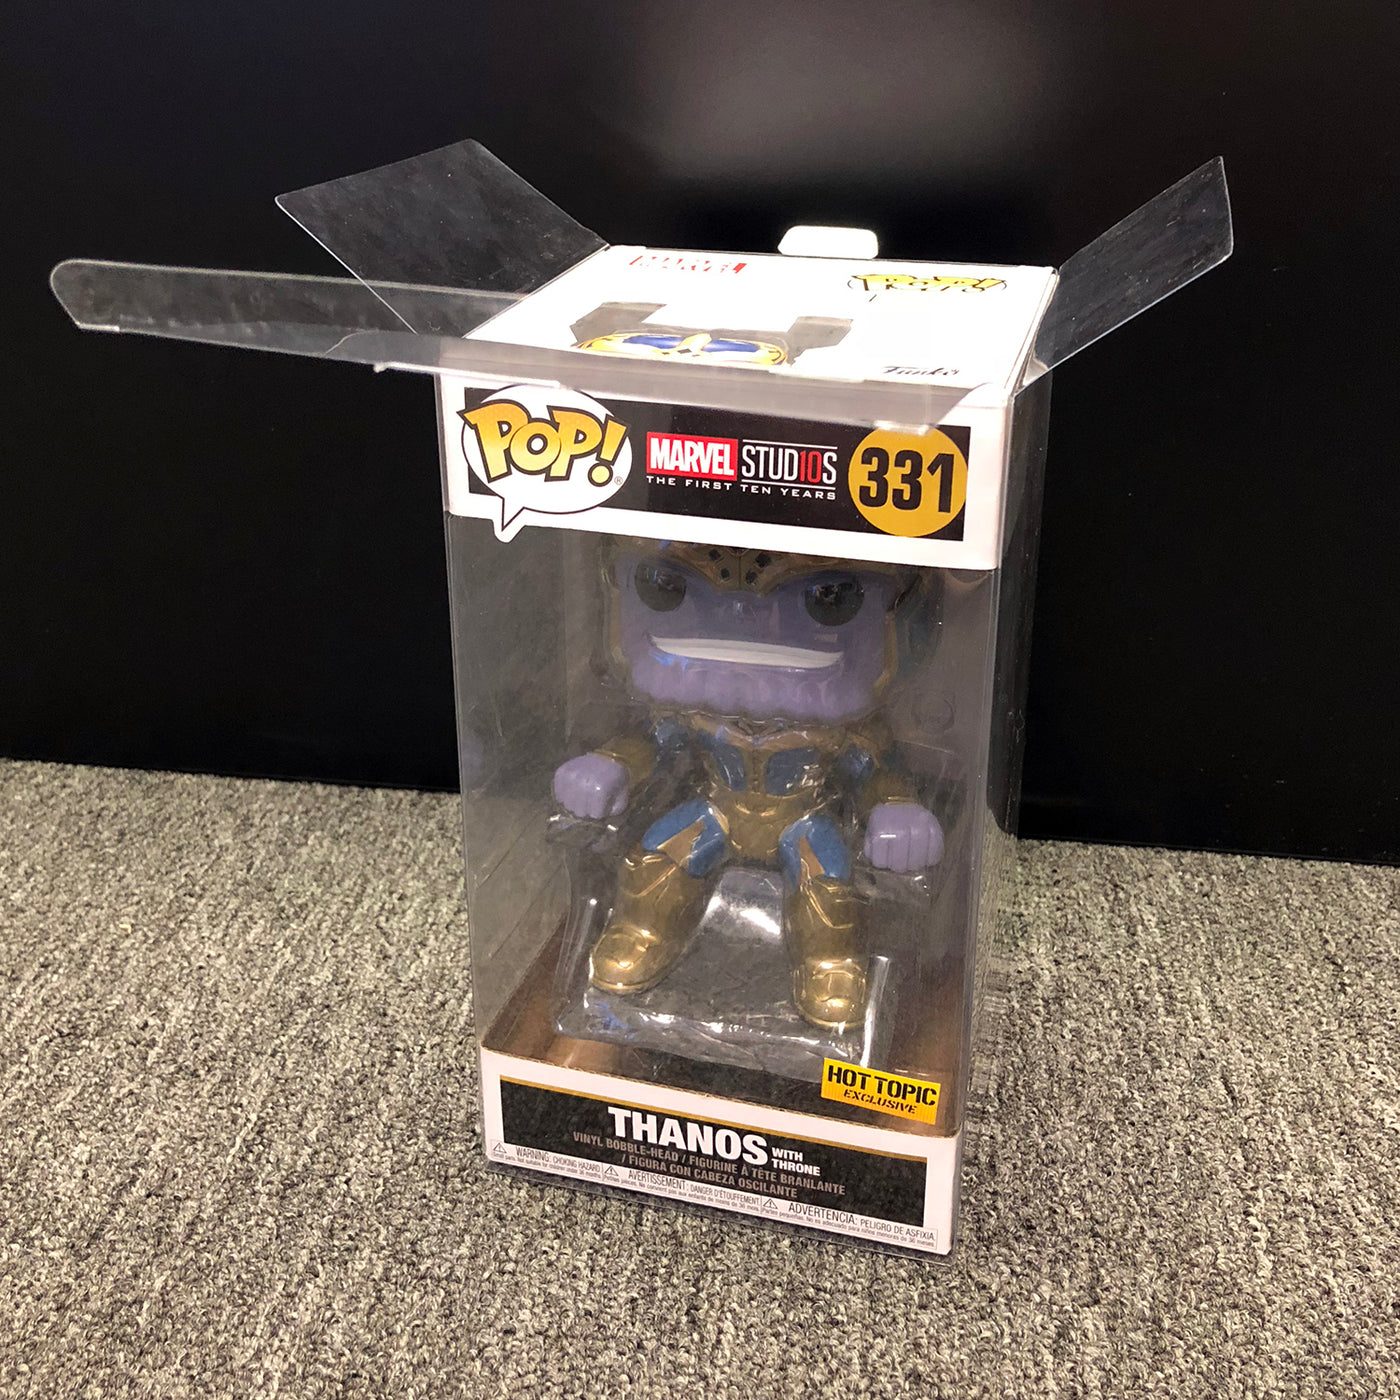 THANOS THRONE Pop Protectors for Funko Throne (Hot Topic Exclusive), 50mm thick  popshield vaulted vinyl